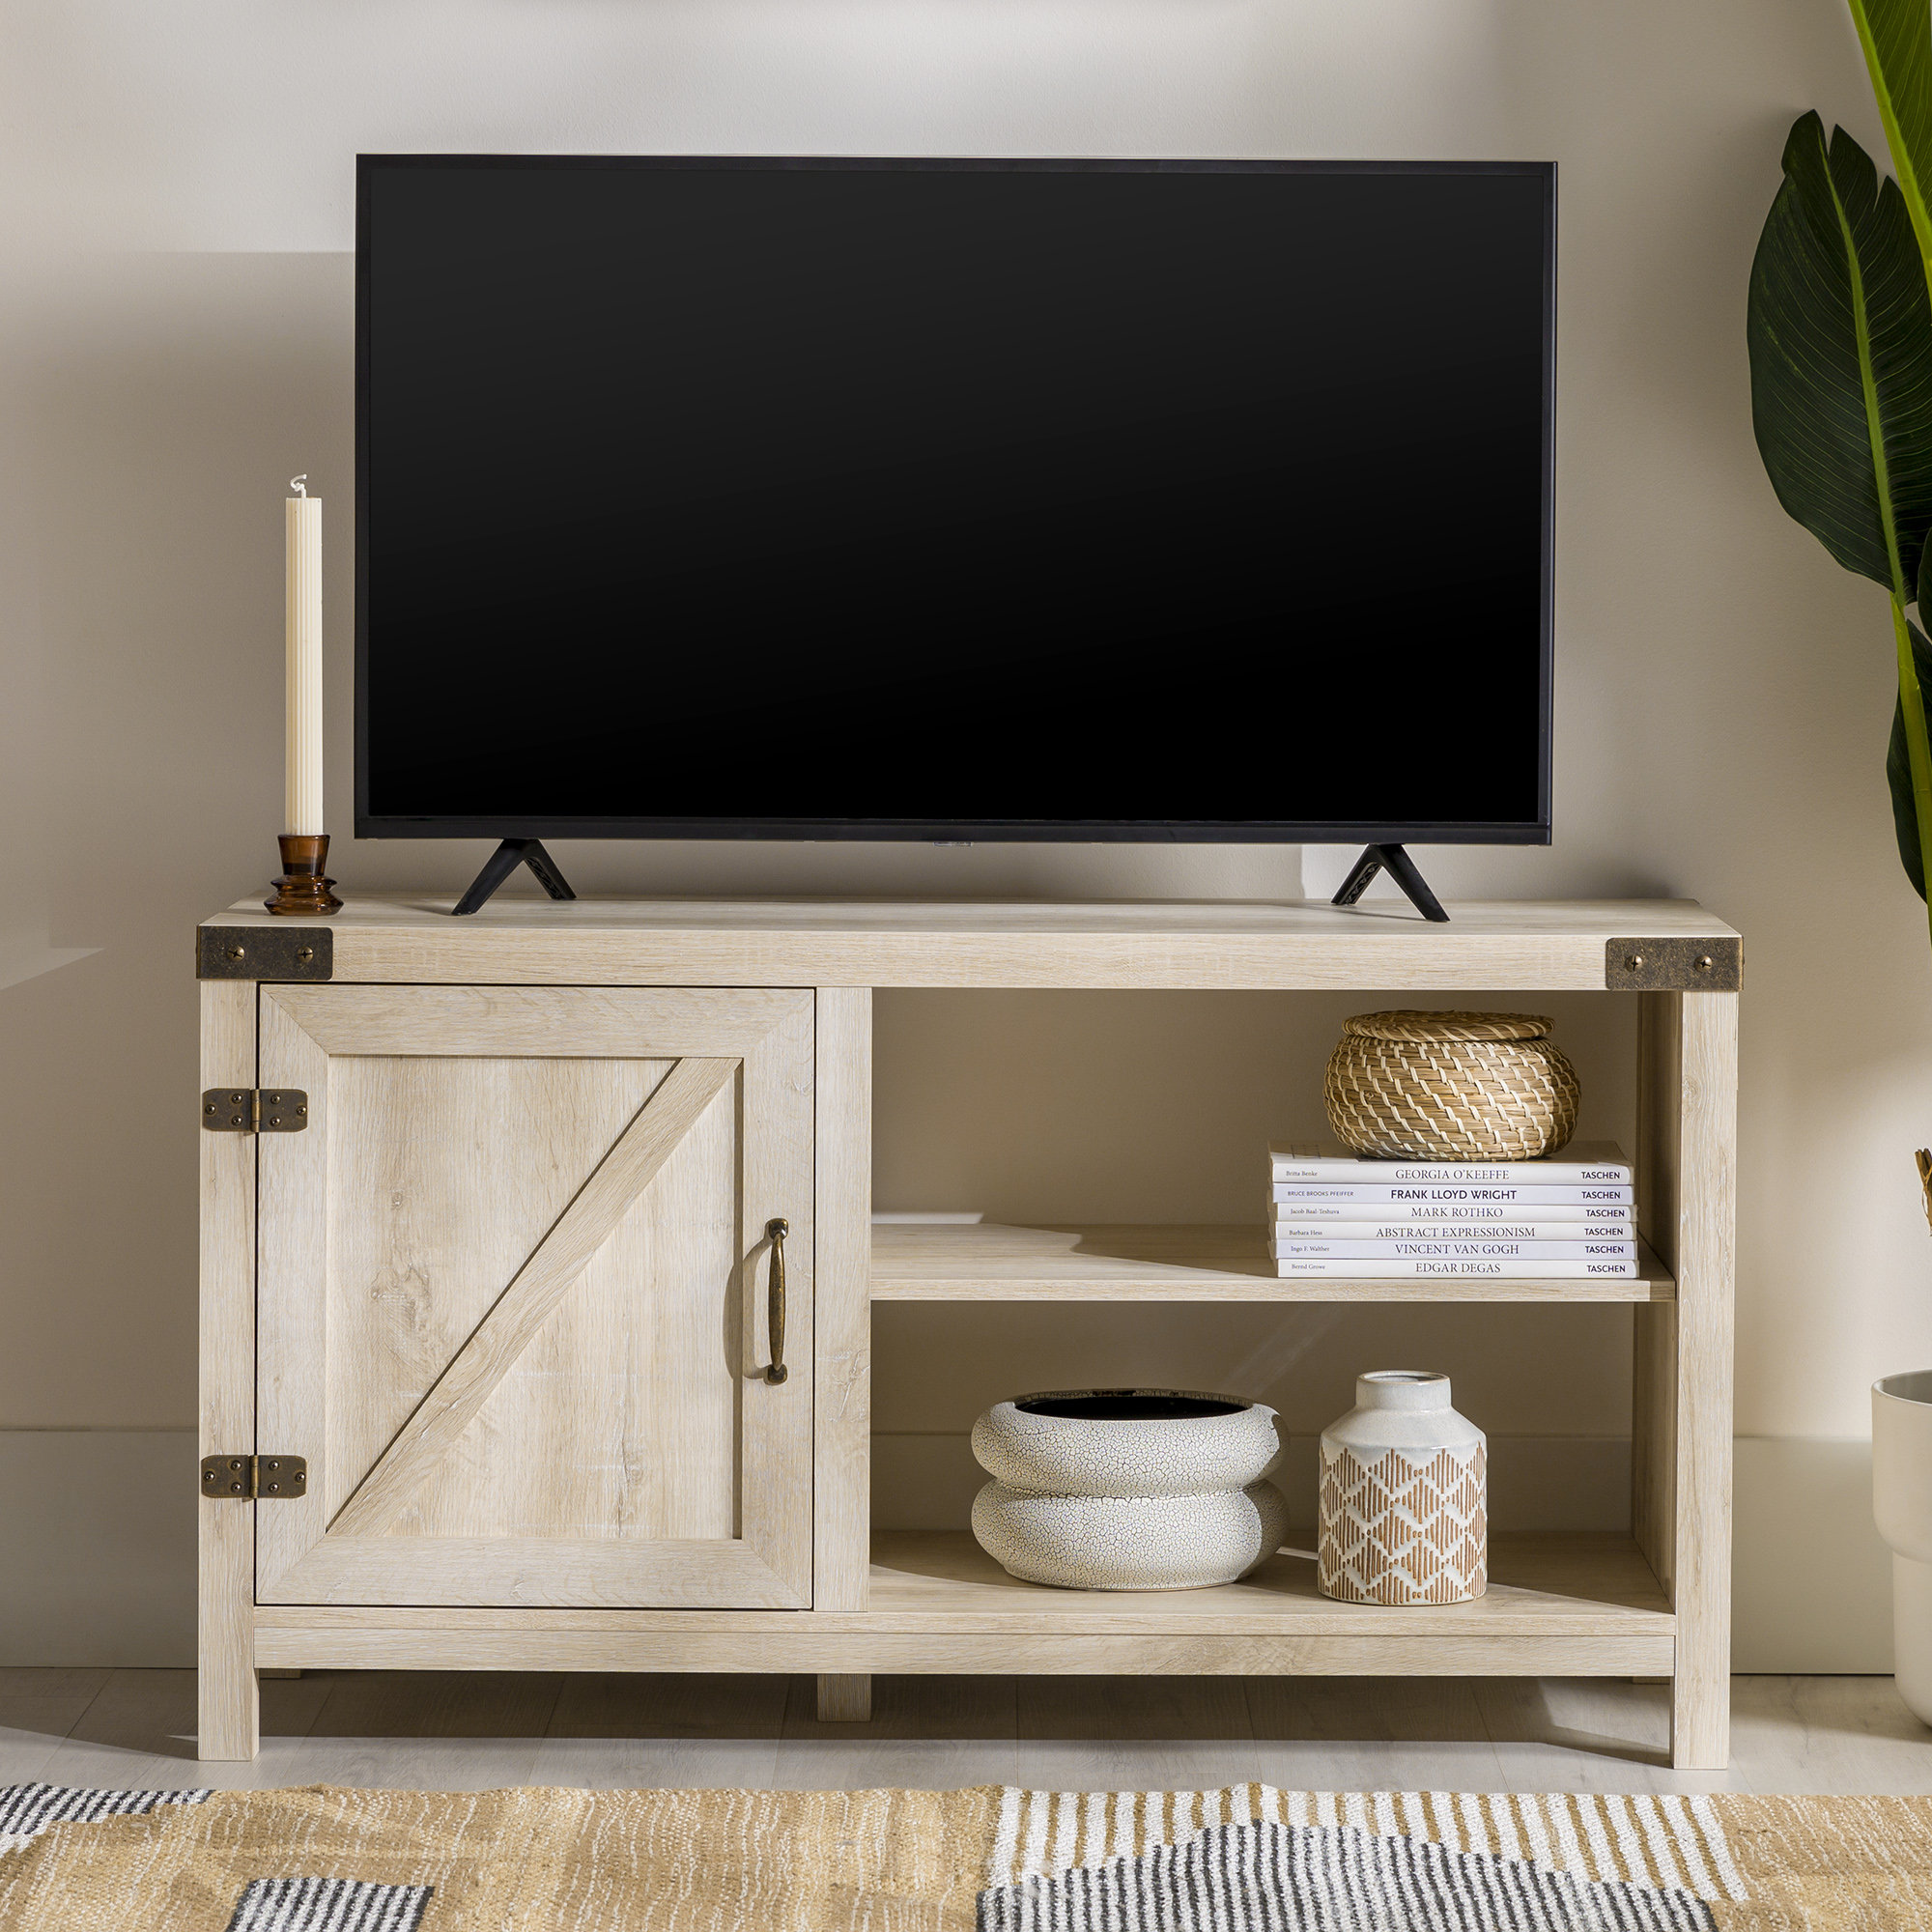 Details about   Rustic Log pine and cedar TV stand entertainment center cabin furniture 